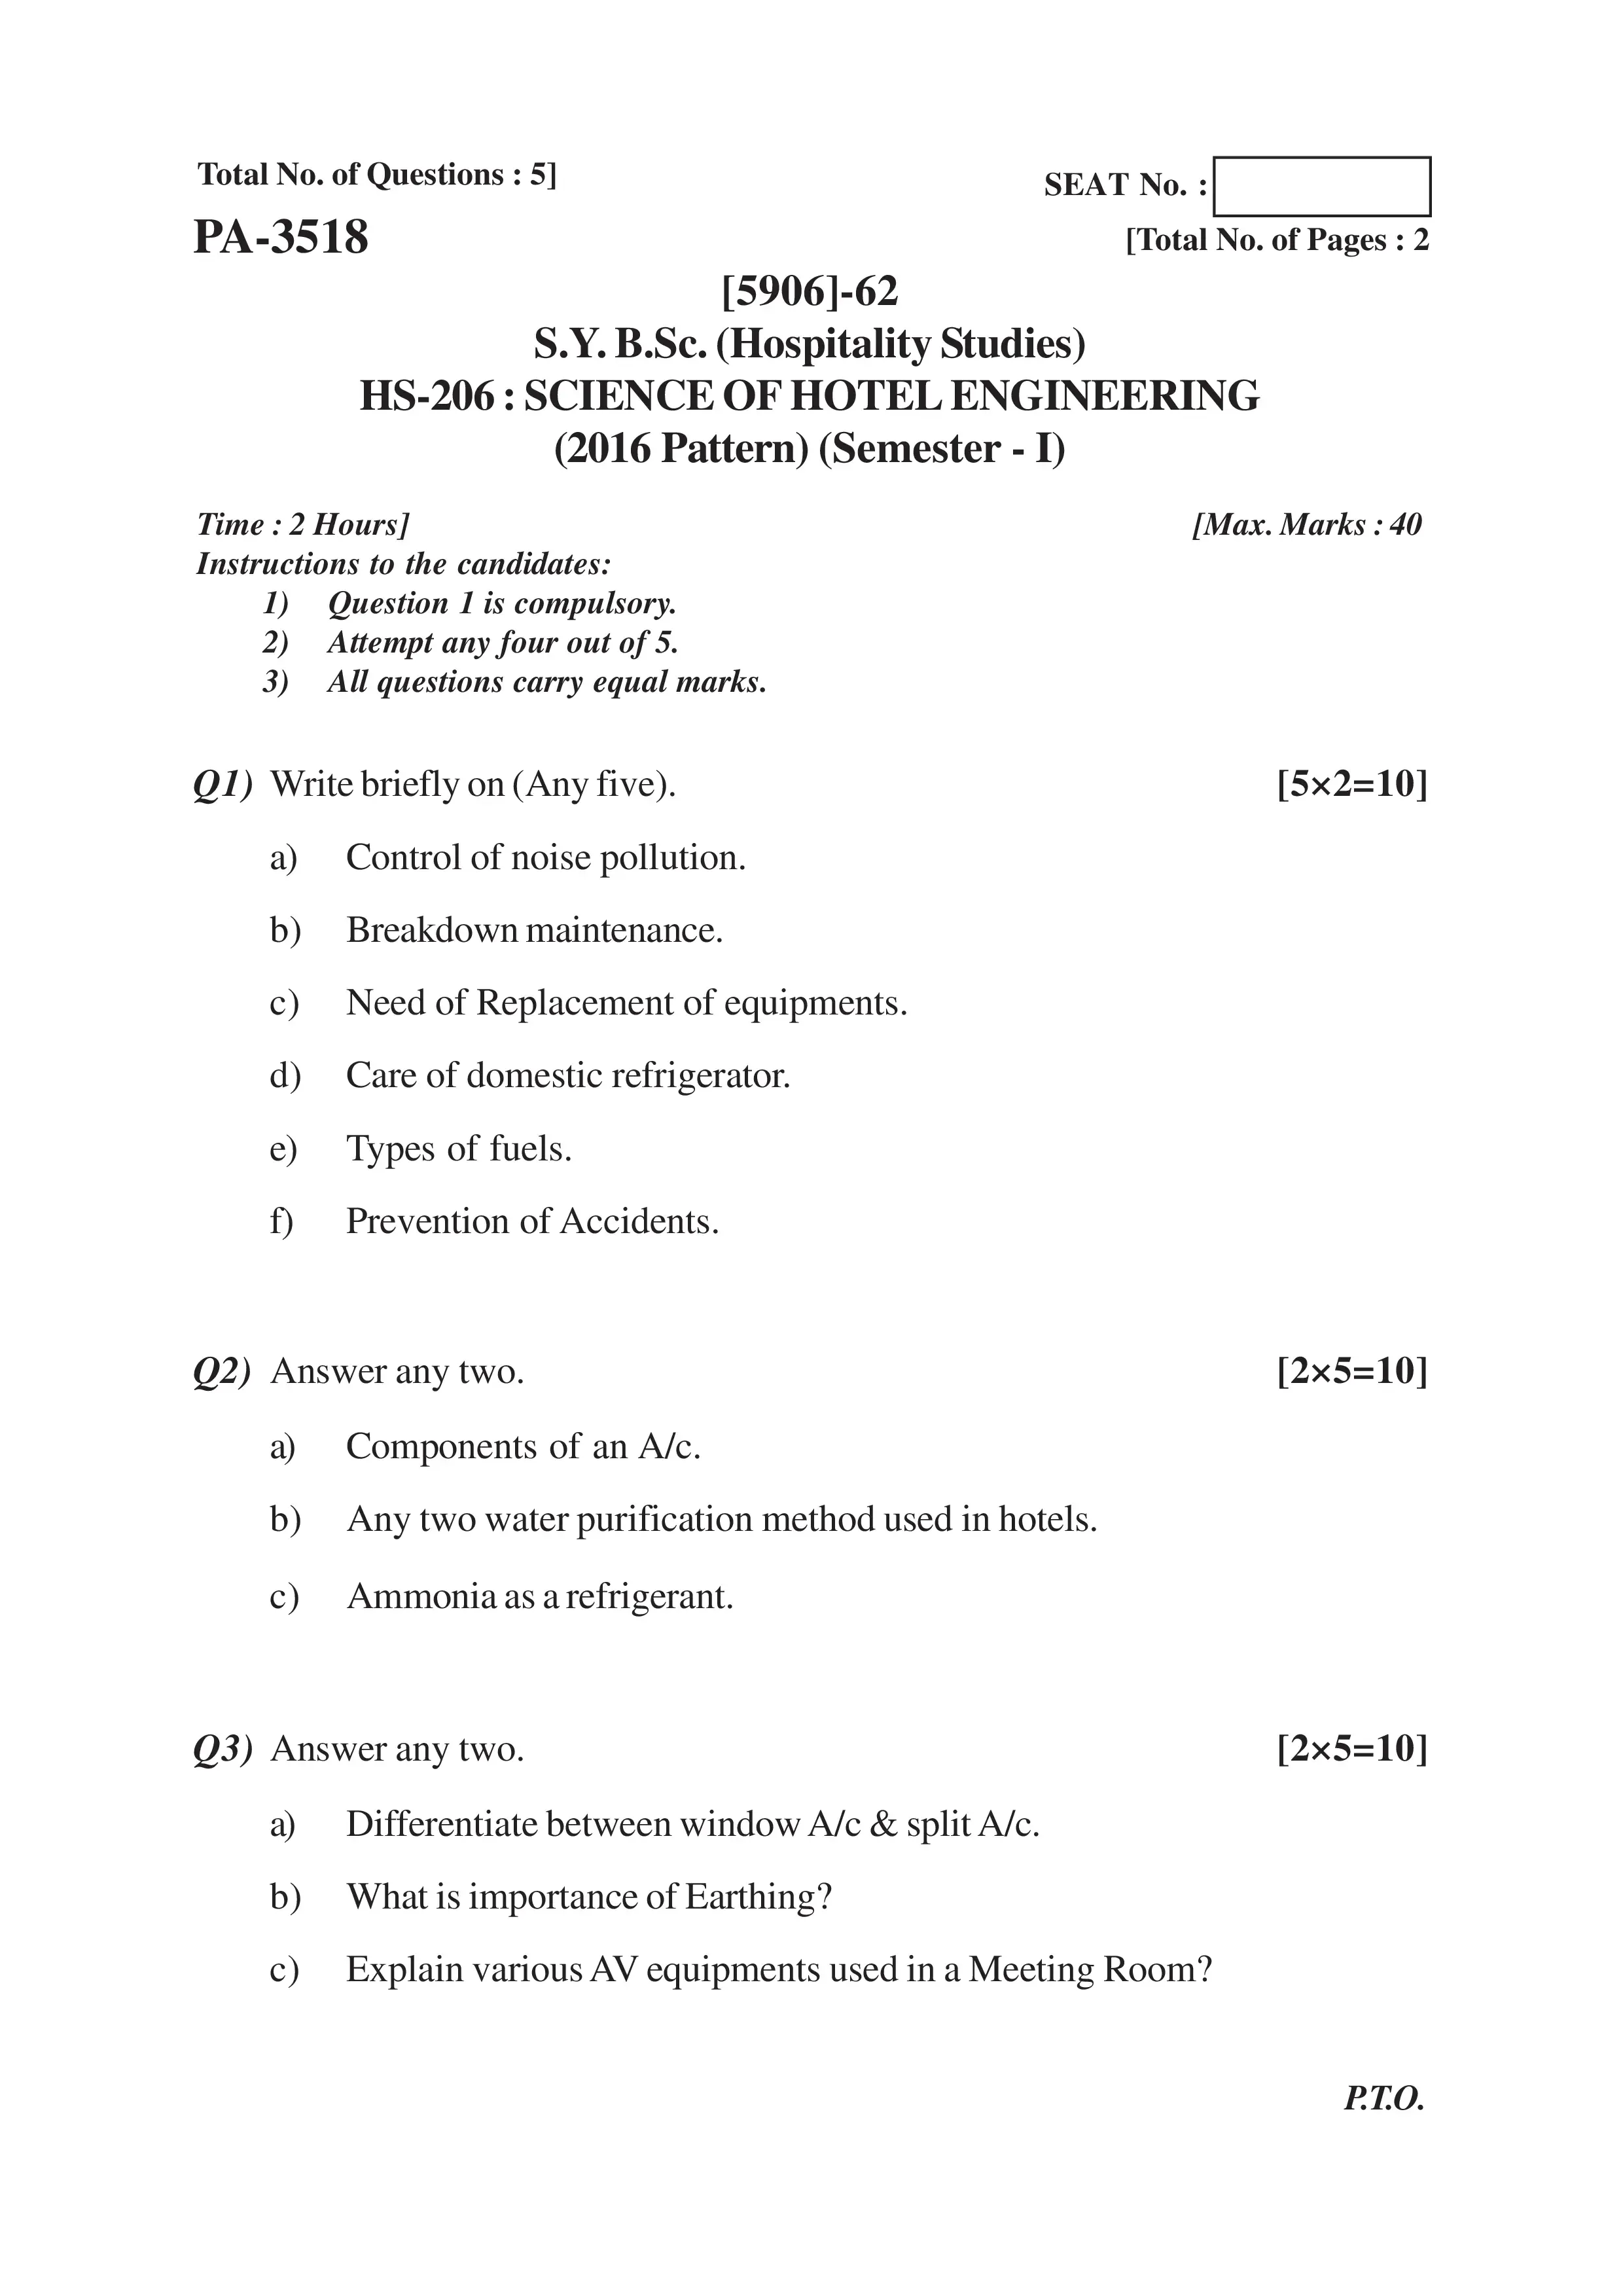 SYBSC(HS) - SCIENCE OF HOTEL ENGINEERING Question Paper (2016 Pattern)